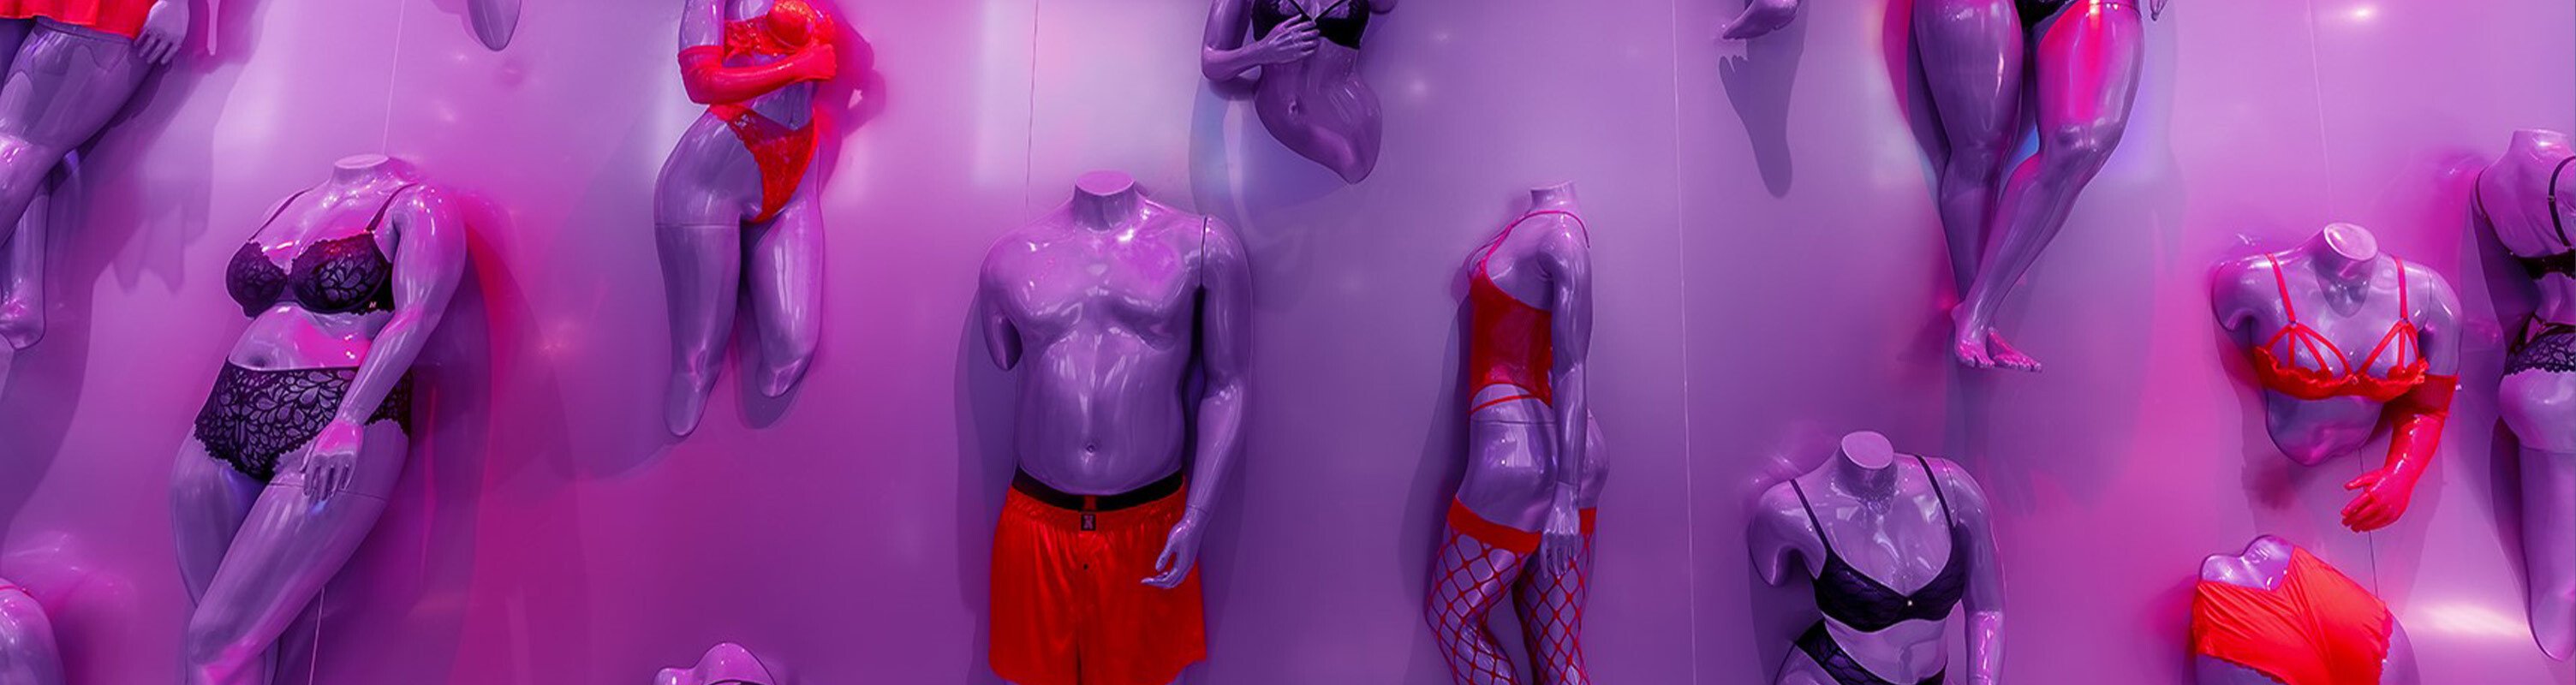 Savage X Fenty retail store wall of mannequins wearing red and black lingerie.